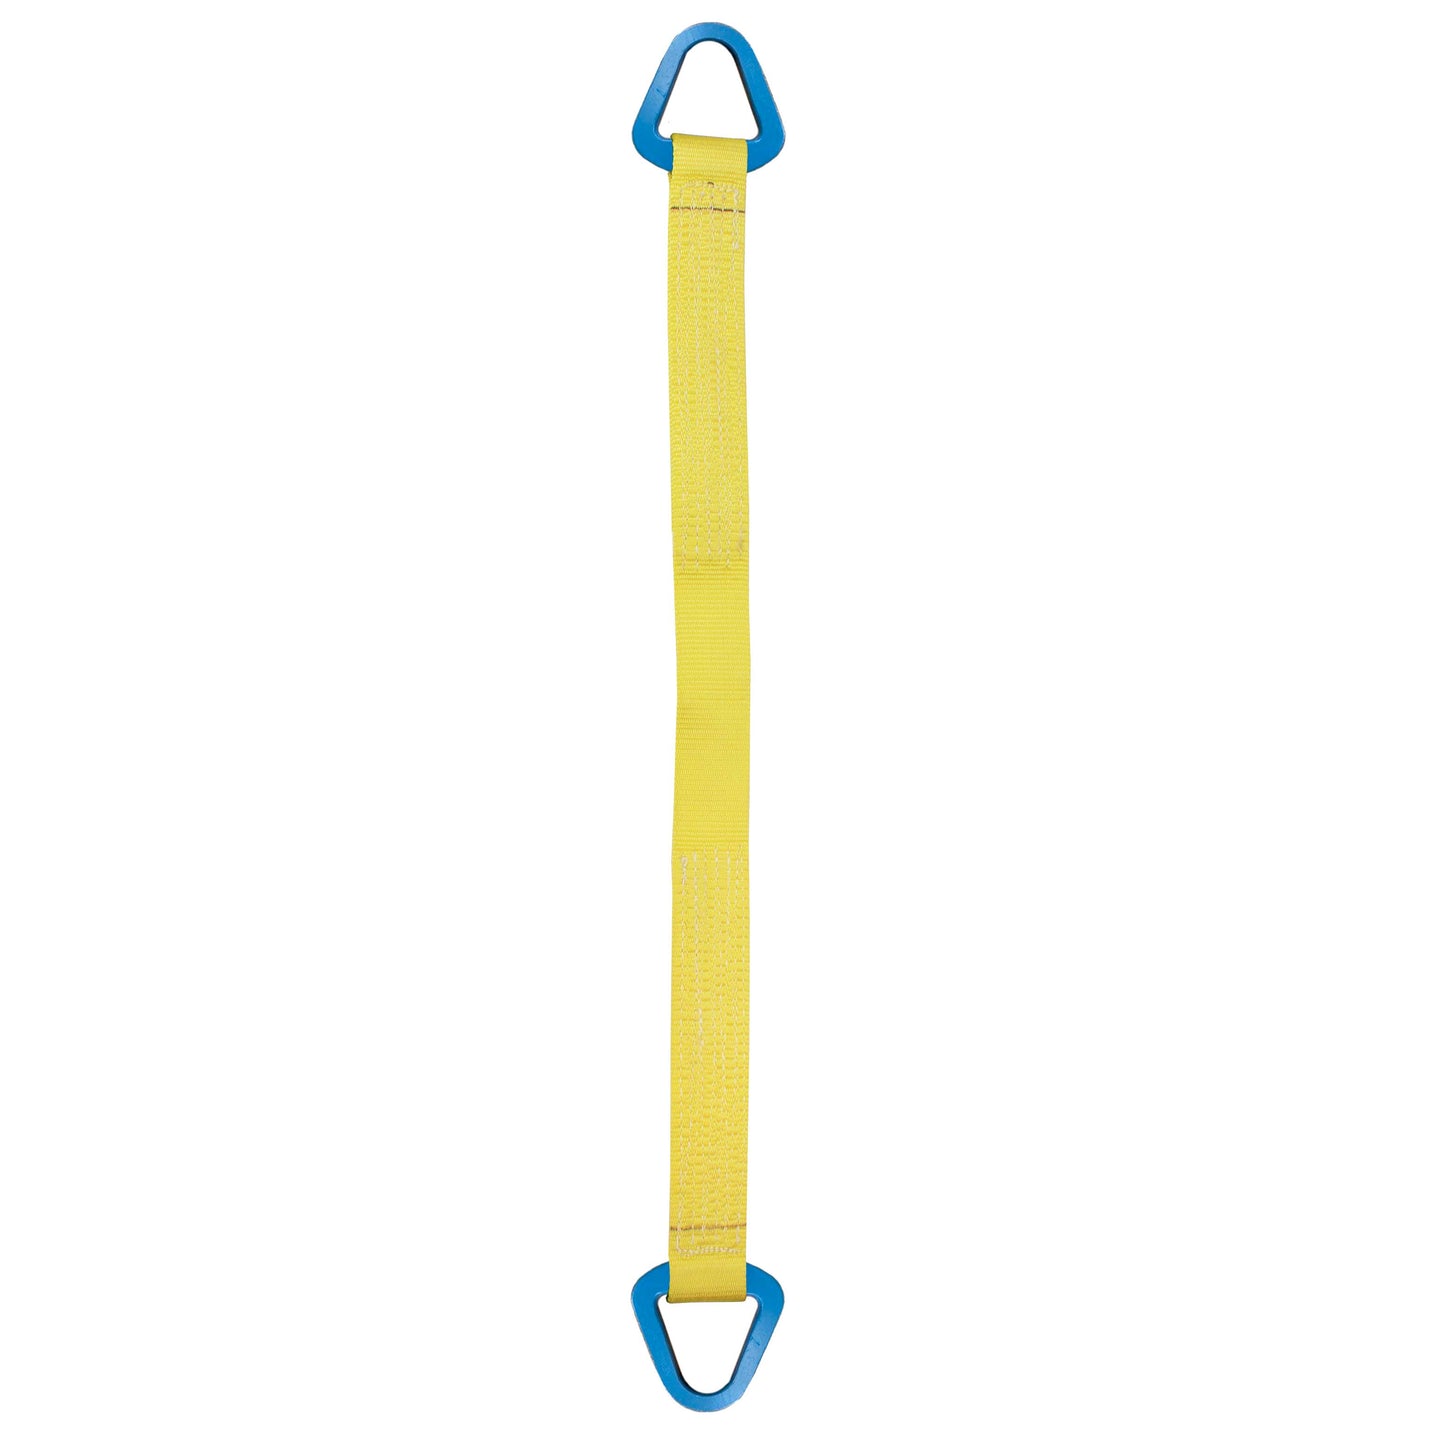 Nylon Lifting Sling Triangle 12 inch x 16 foot 1ply image 1 of 2